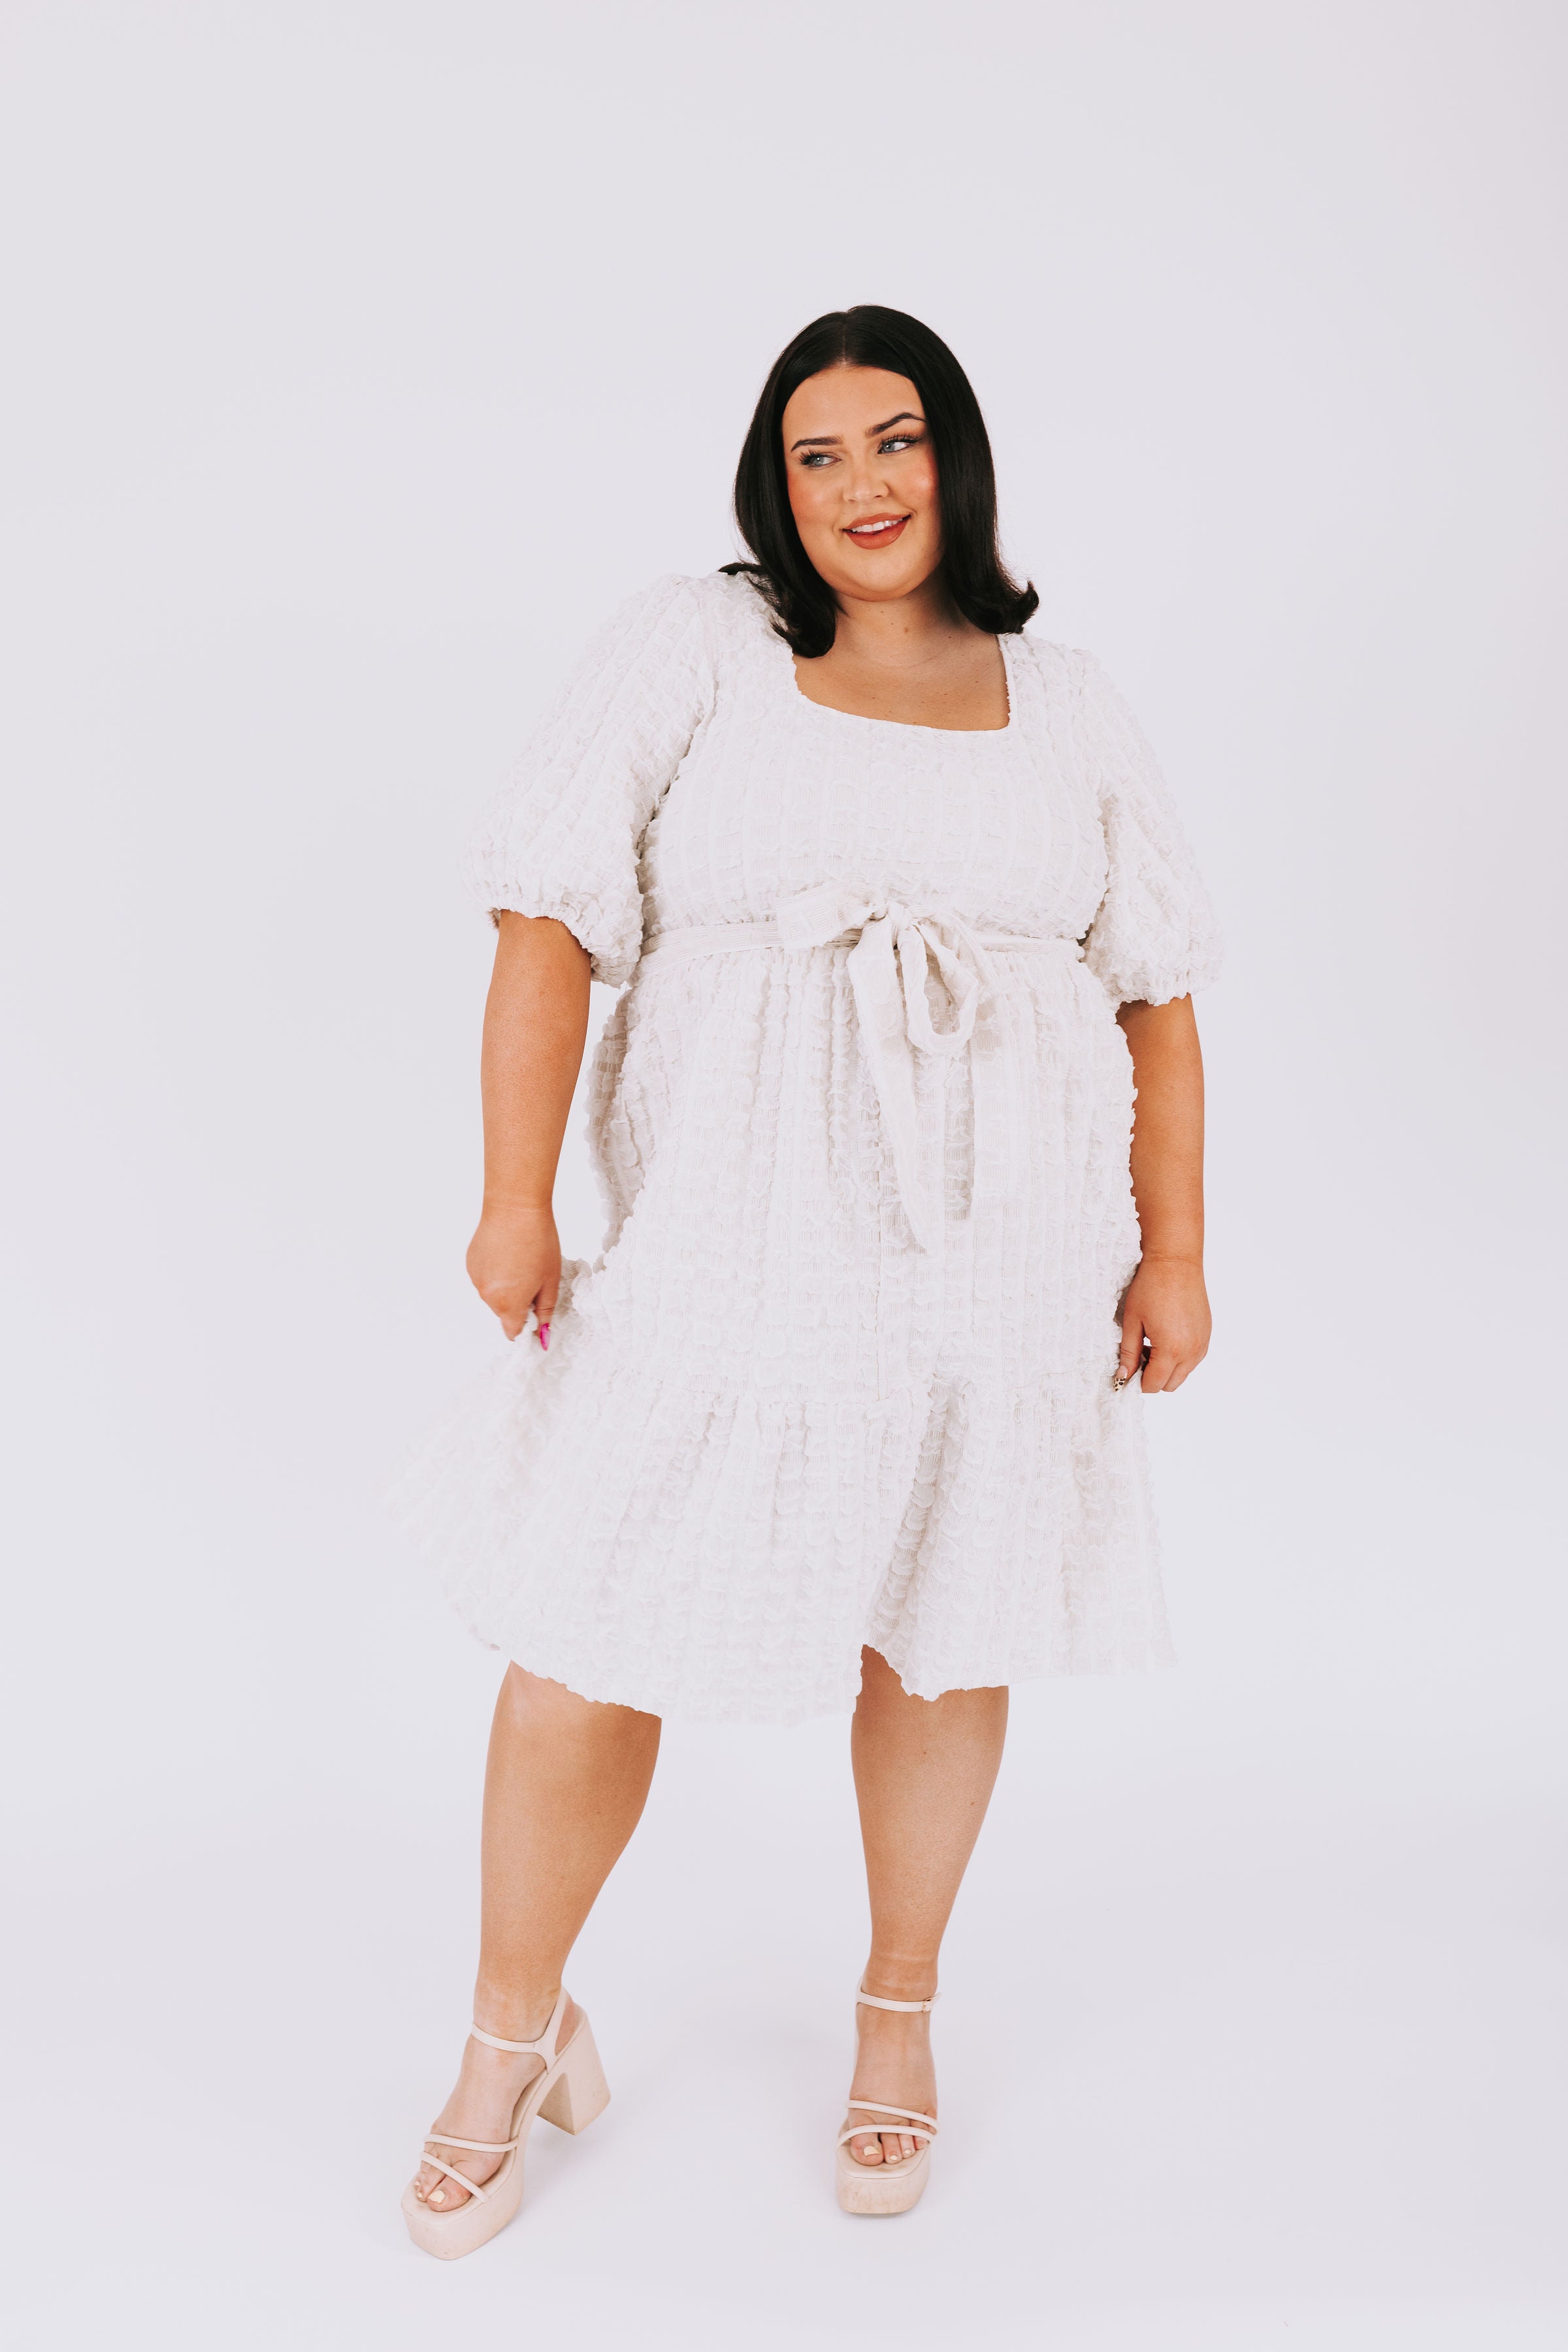 PLUS SIZE - Go Your Own Way Dress